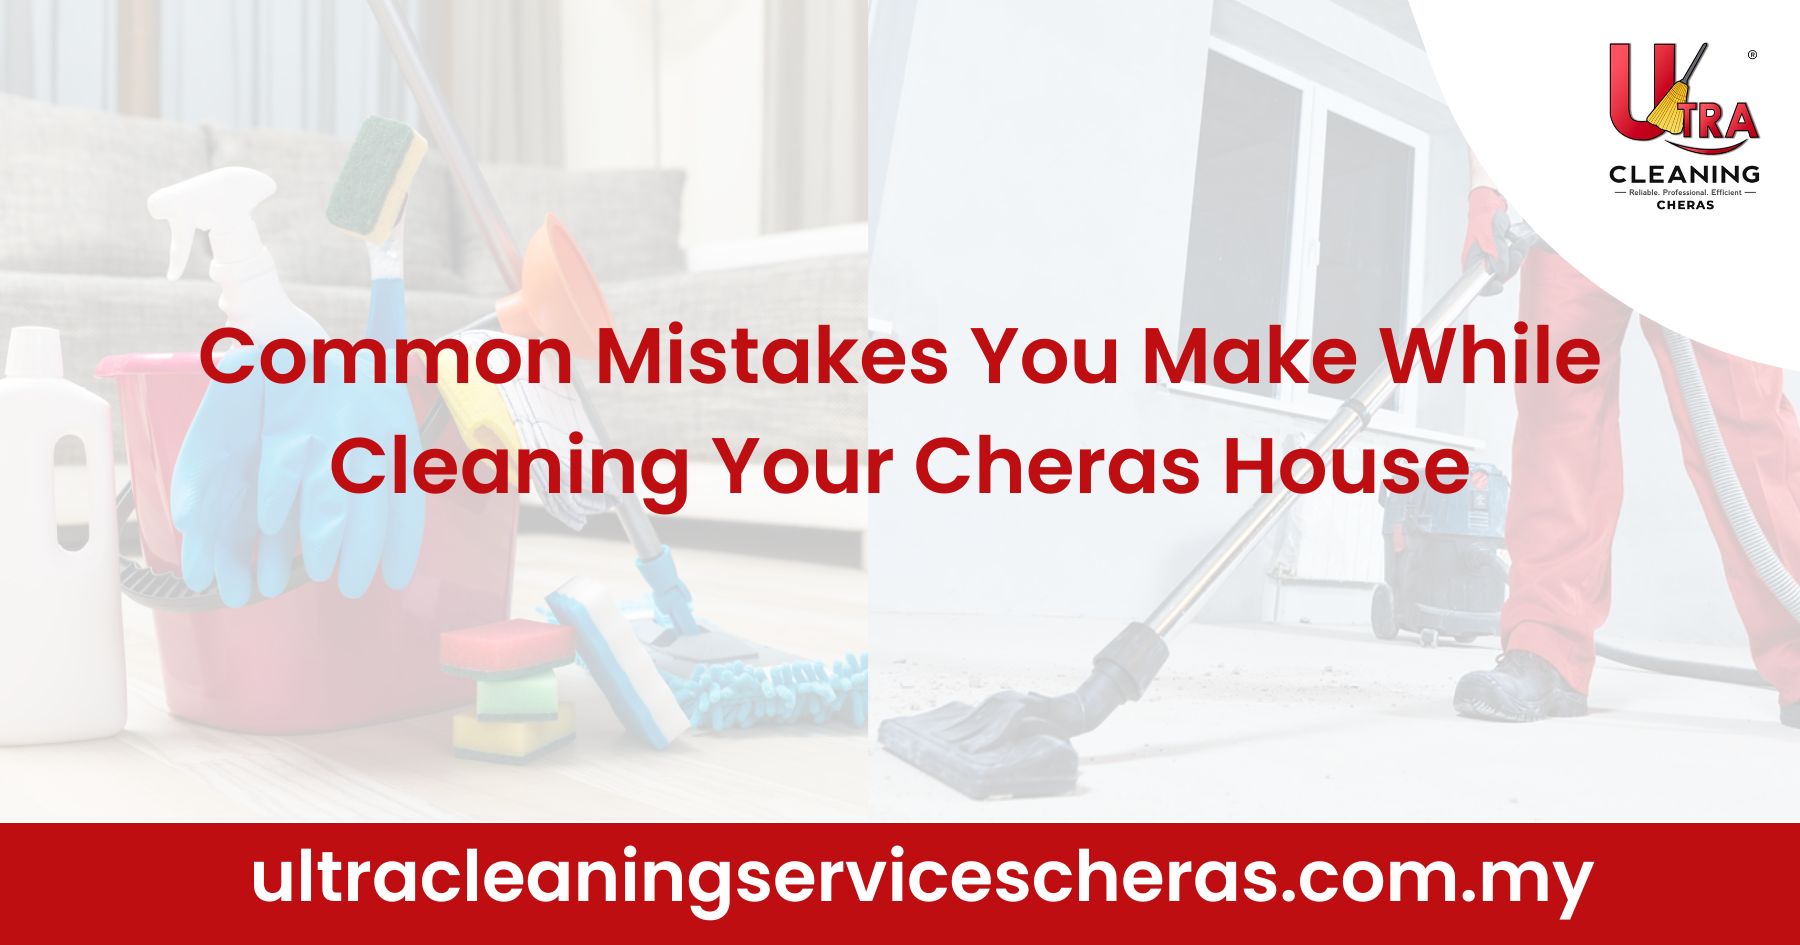 Common Mistakes You Make While Cleaning Your Cheras House